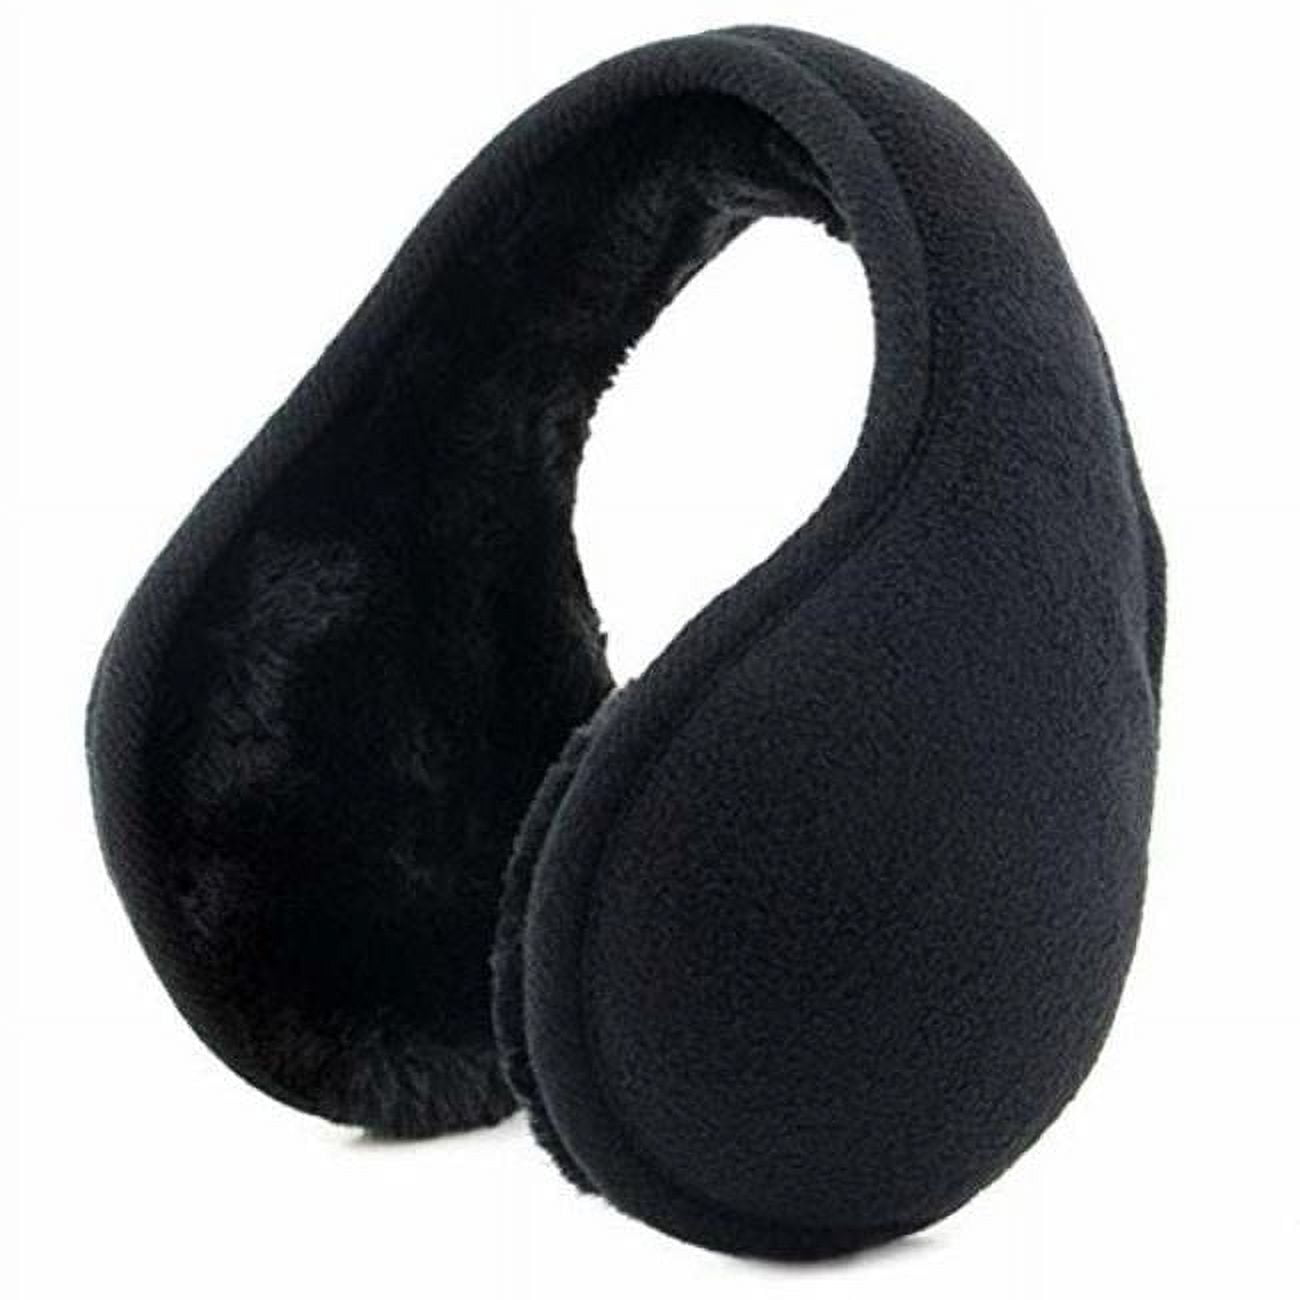 Picture of DDI 2341332 Black Plush Lined Earmuffs Case of 240